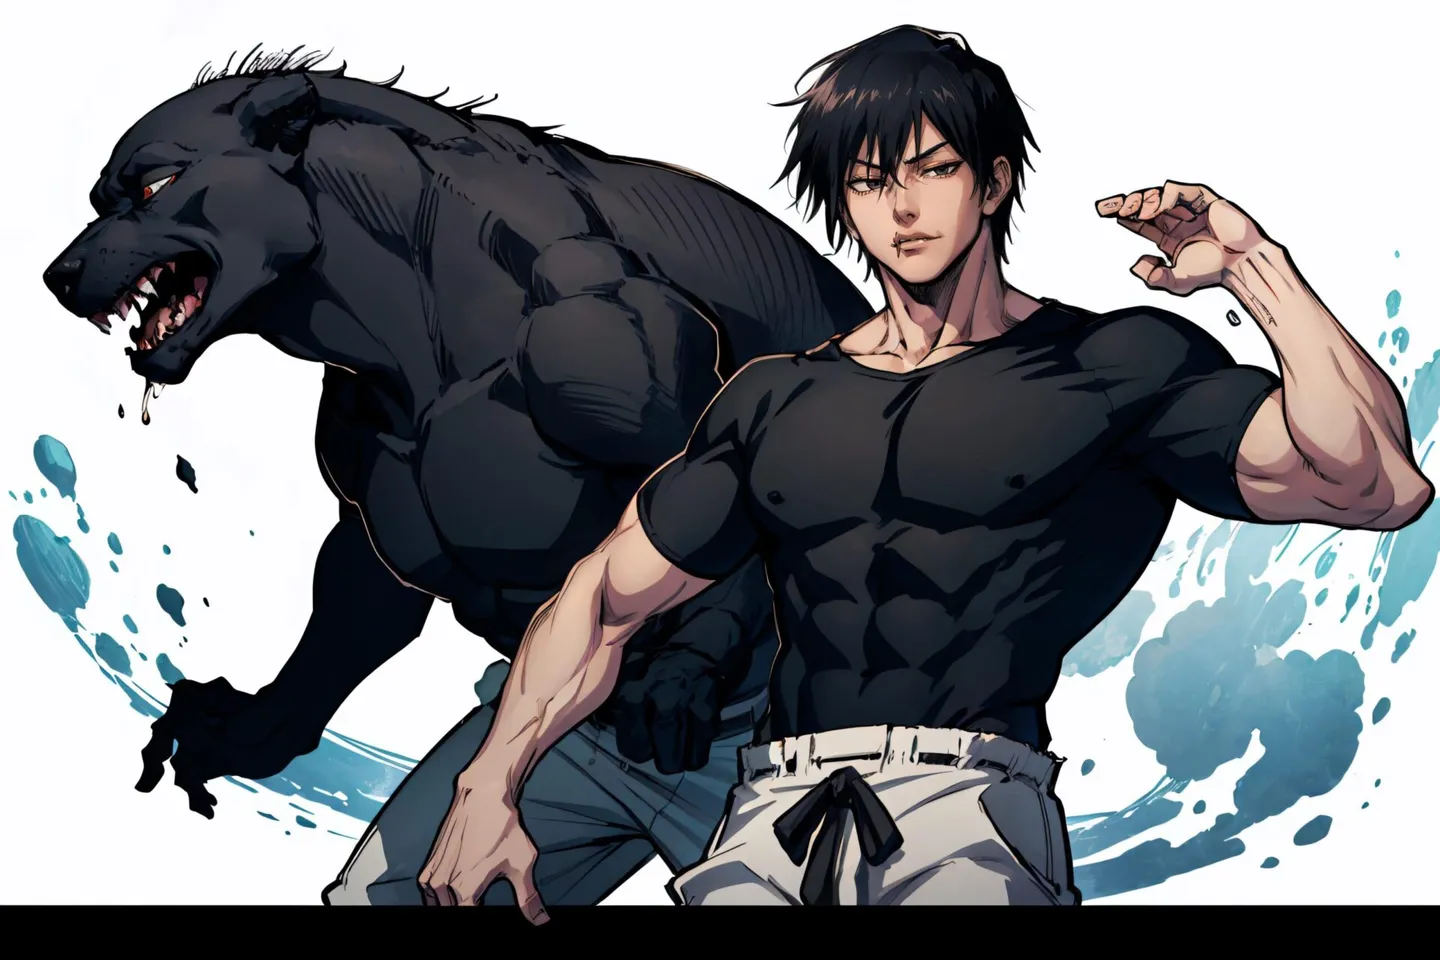 A muscular man alongside a black panther in an anime style. This is an AI generated image using Stable Diffusion.